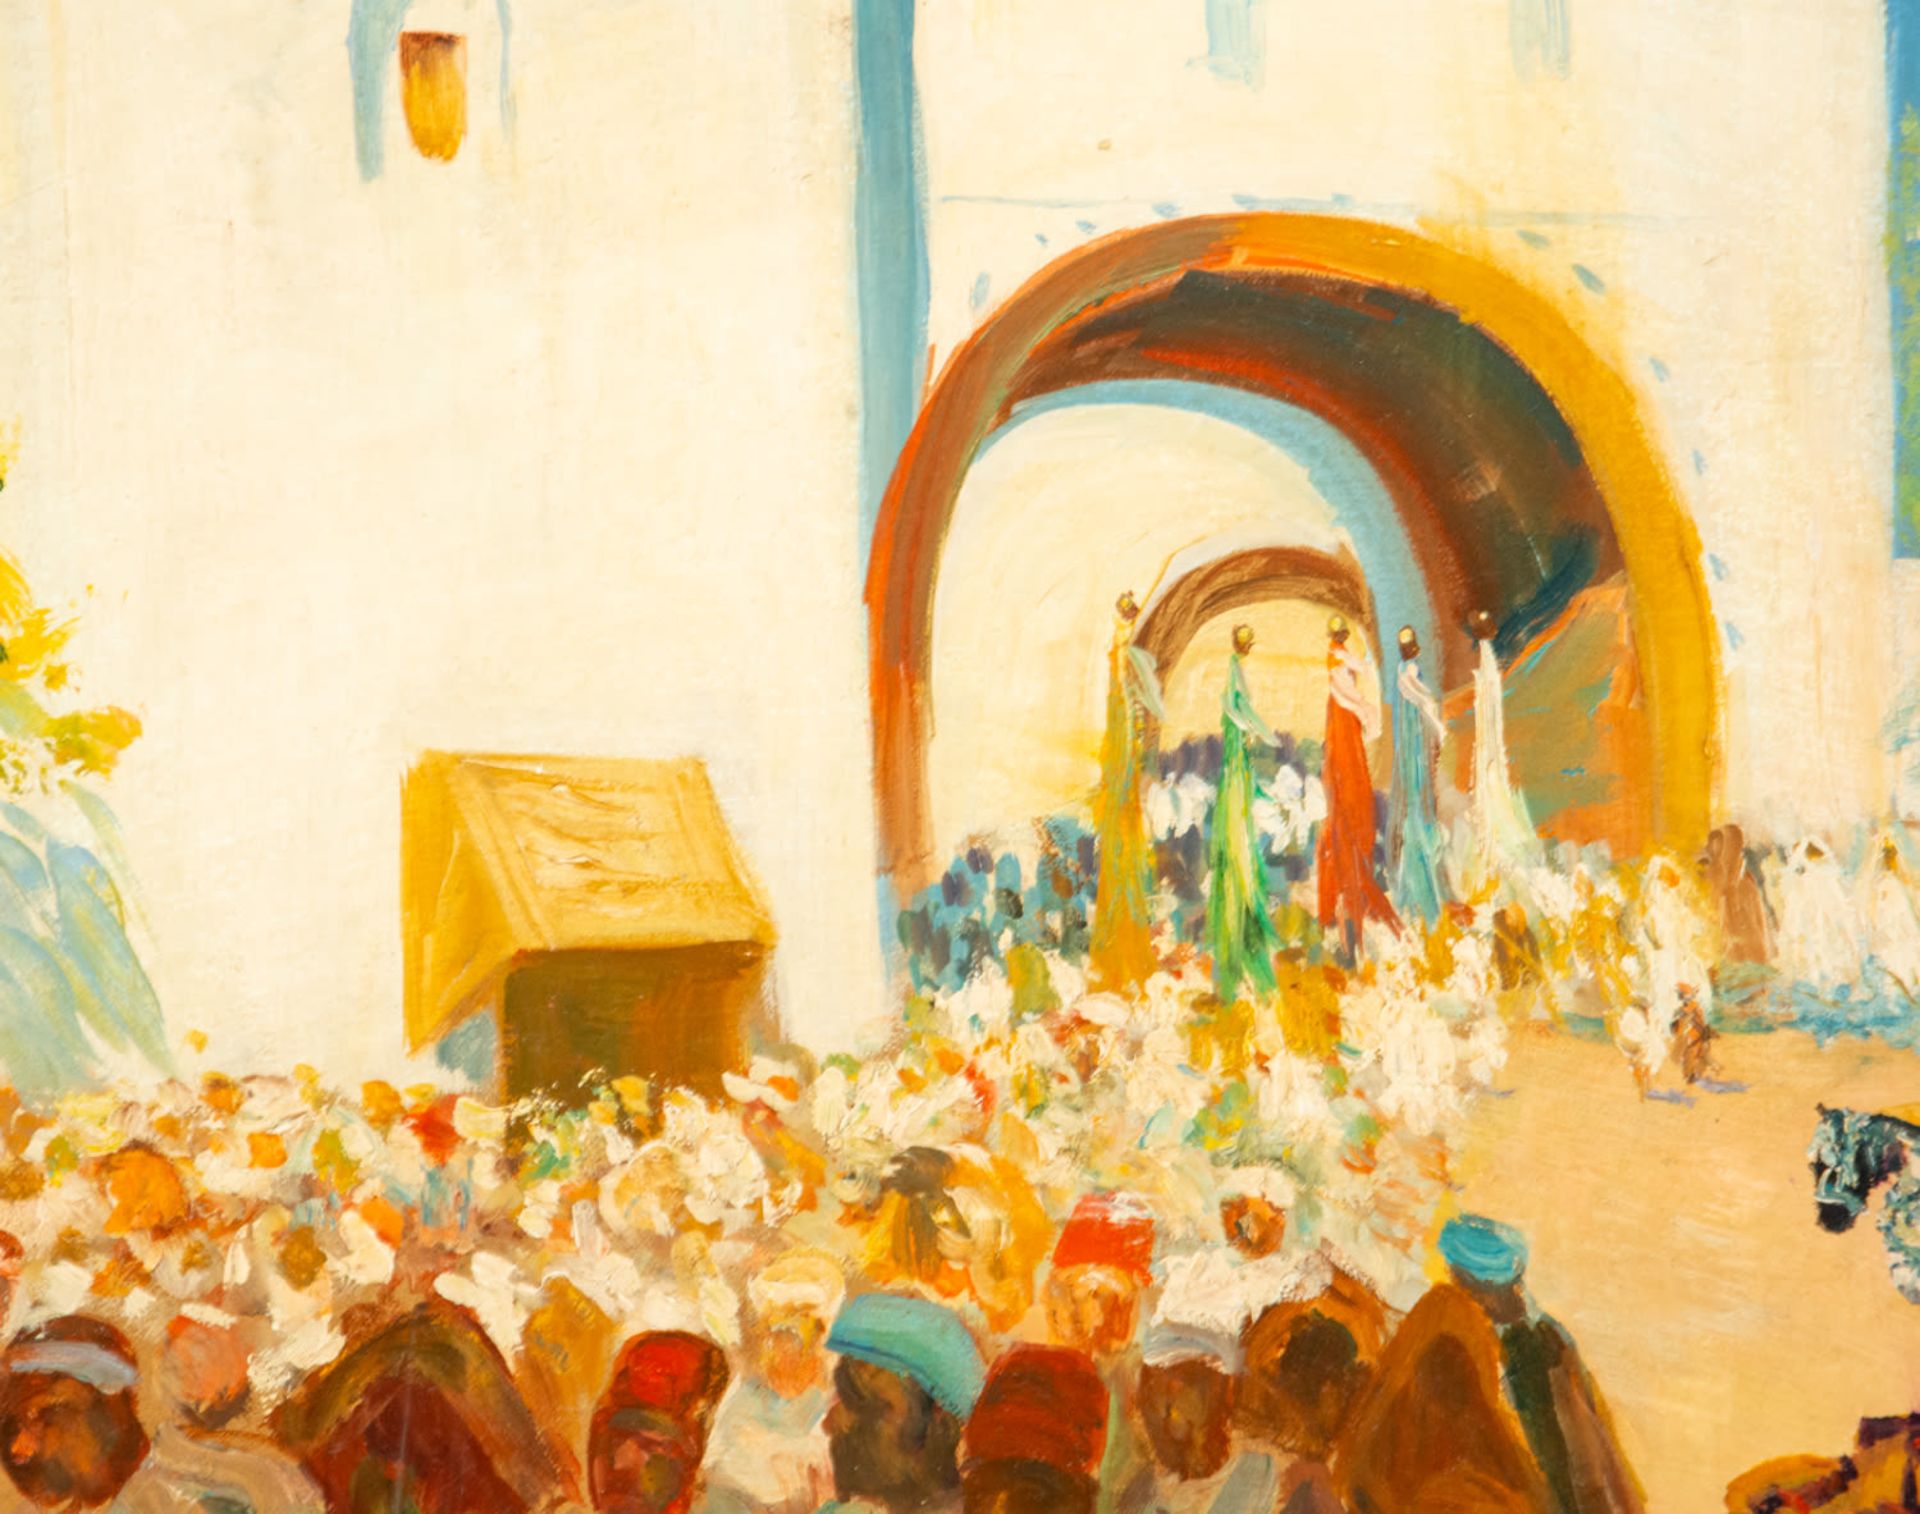 View of Characters in Orientalist Souk, signed, Spanish school of the 19th century - early 20th cent - Bild 4 aus 6